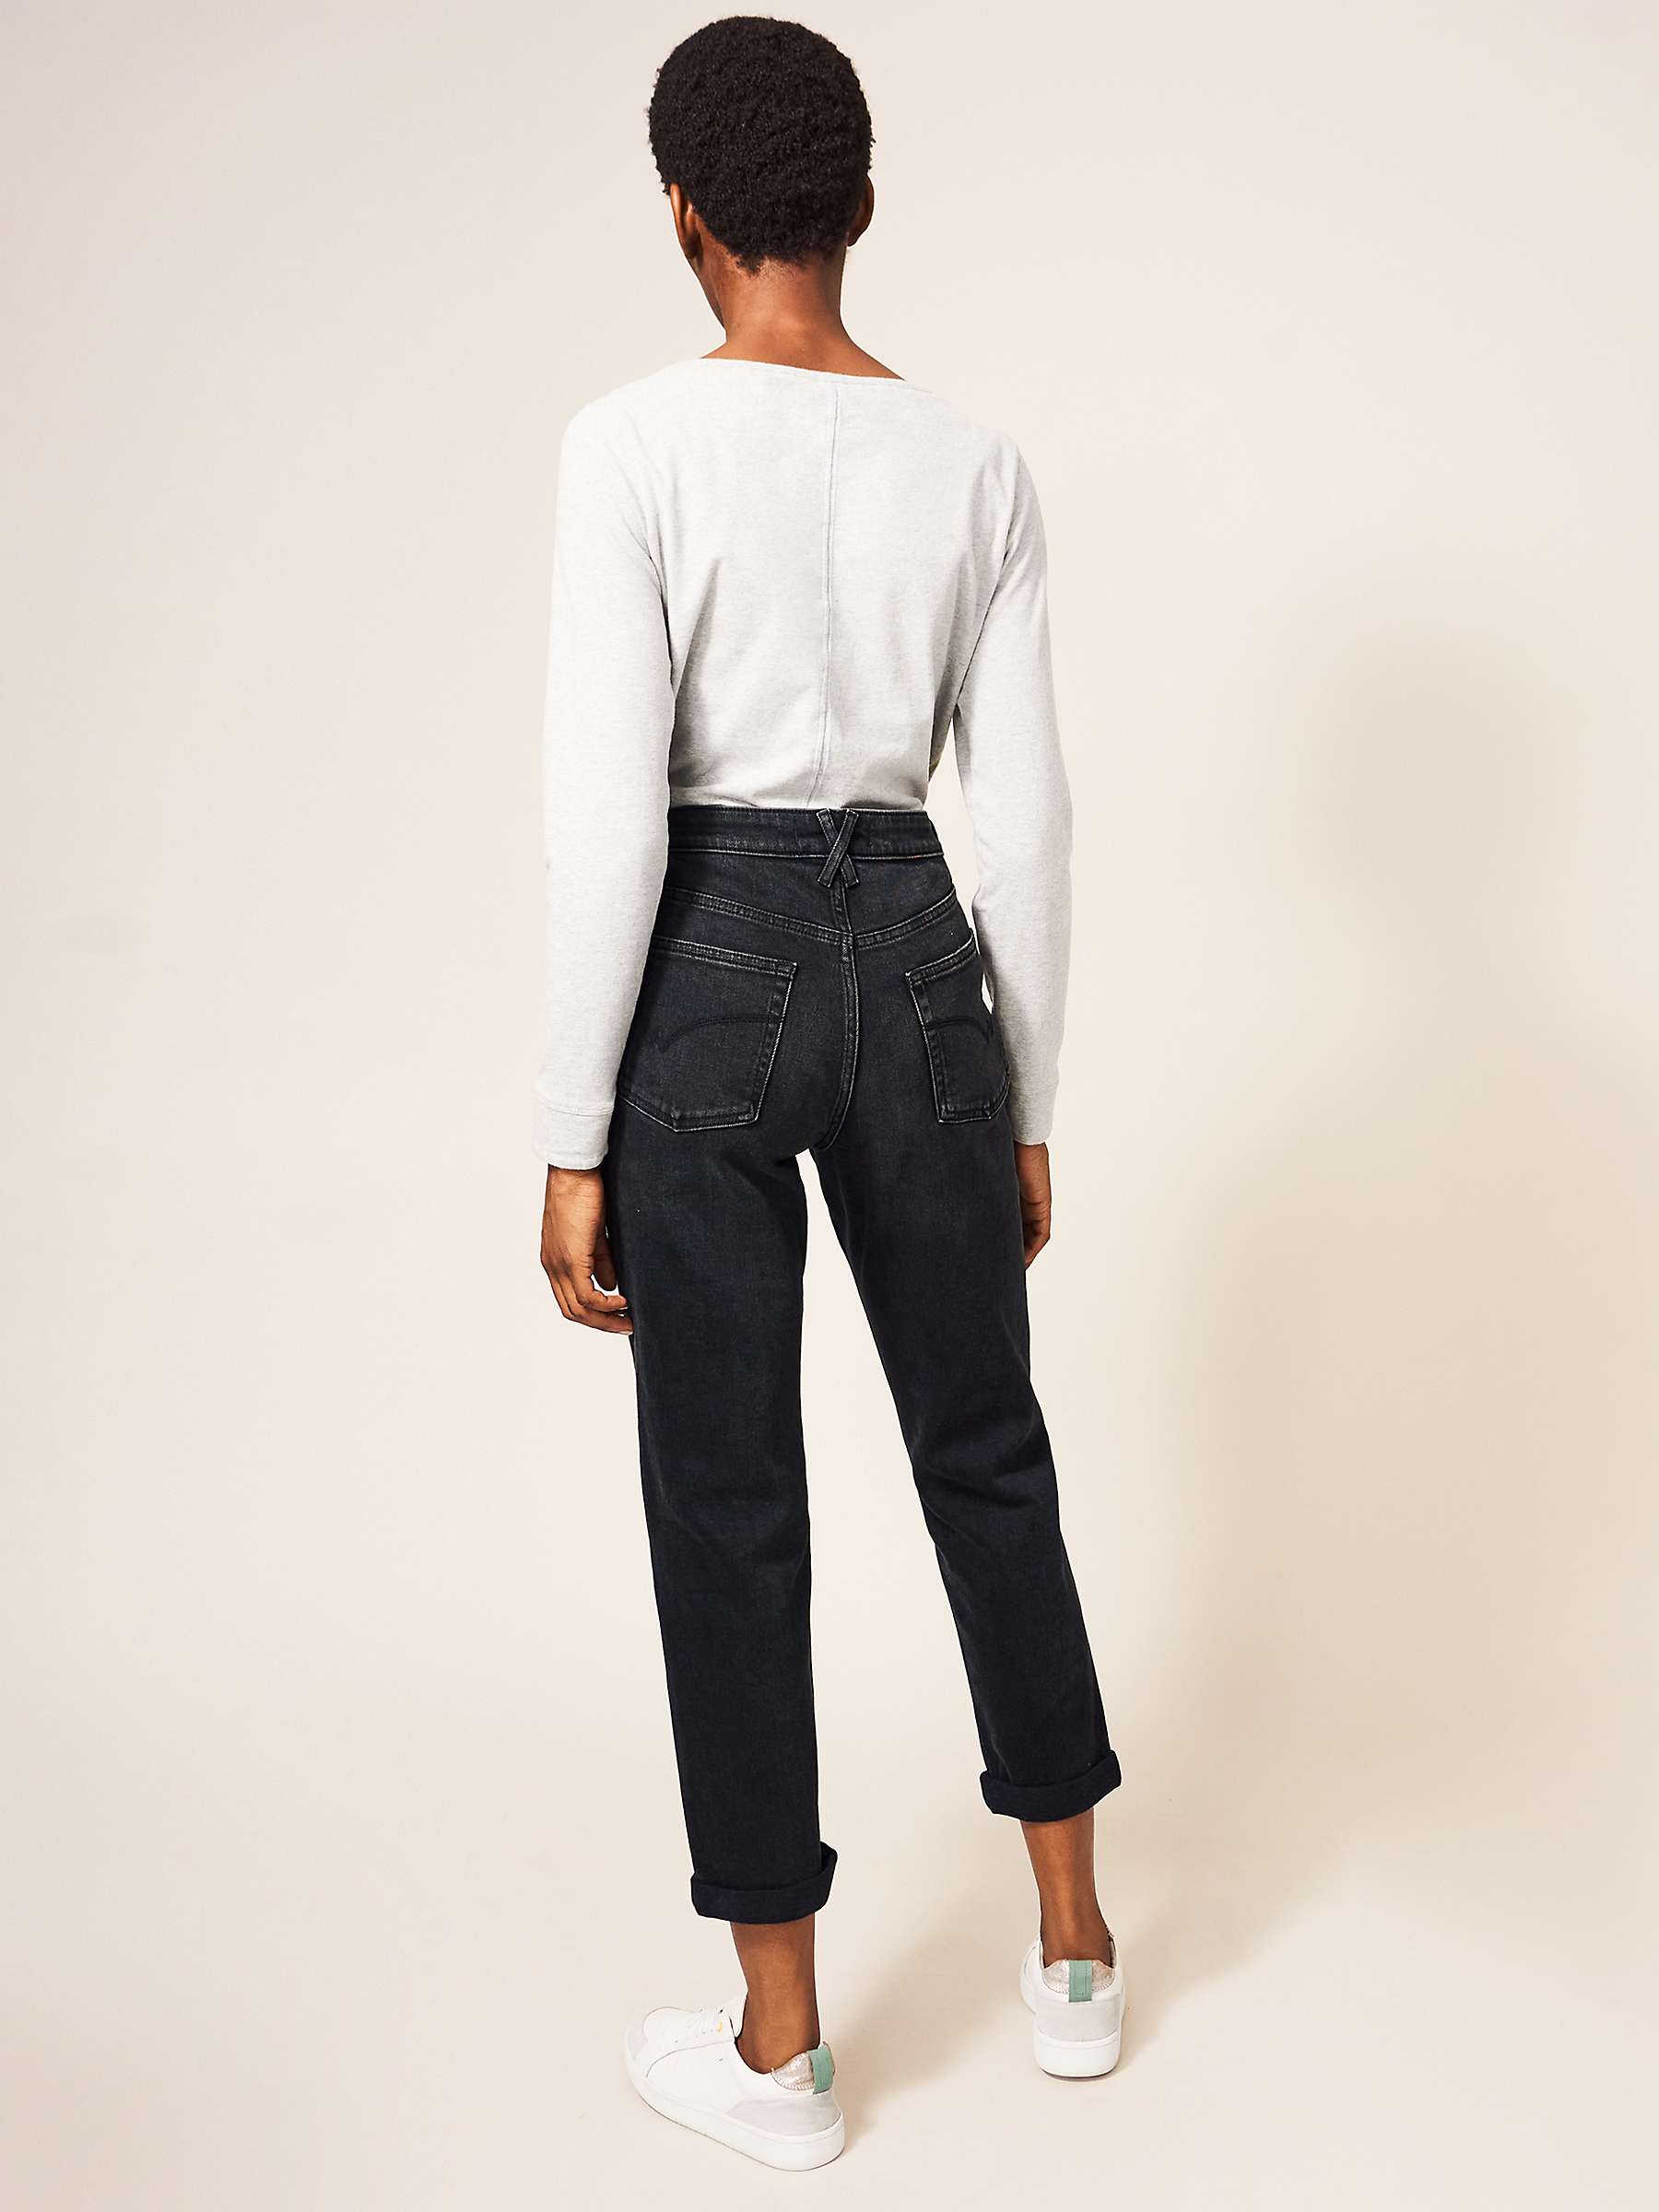 White Stuff Katy Relaxed Slim Jeans, Washed Black at John Lewis & Partners